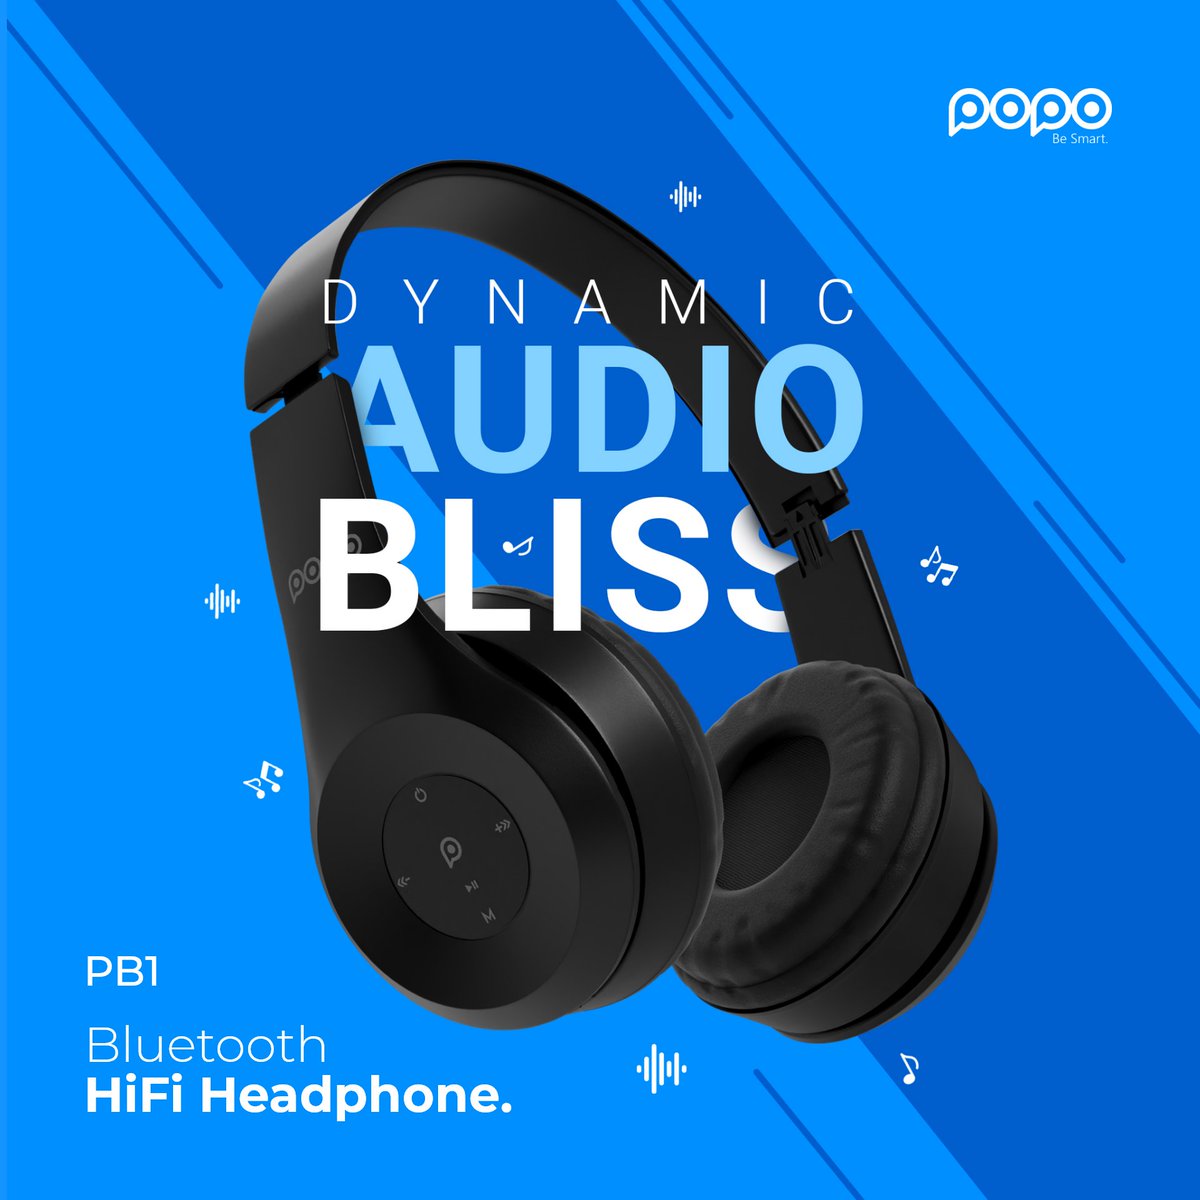 Are you ready to experience dynamic audio bliss? If you love music, you'll love the PB1 Bluetooth HiFi Headphone by popo.
.
.
#popo #besmart #bluetoothheadphones #hifisound #musiclovers #wirelessaudio #pb1